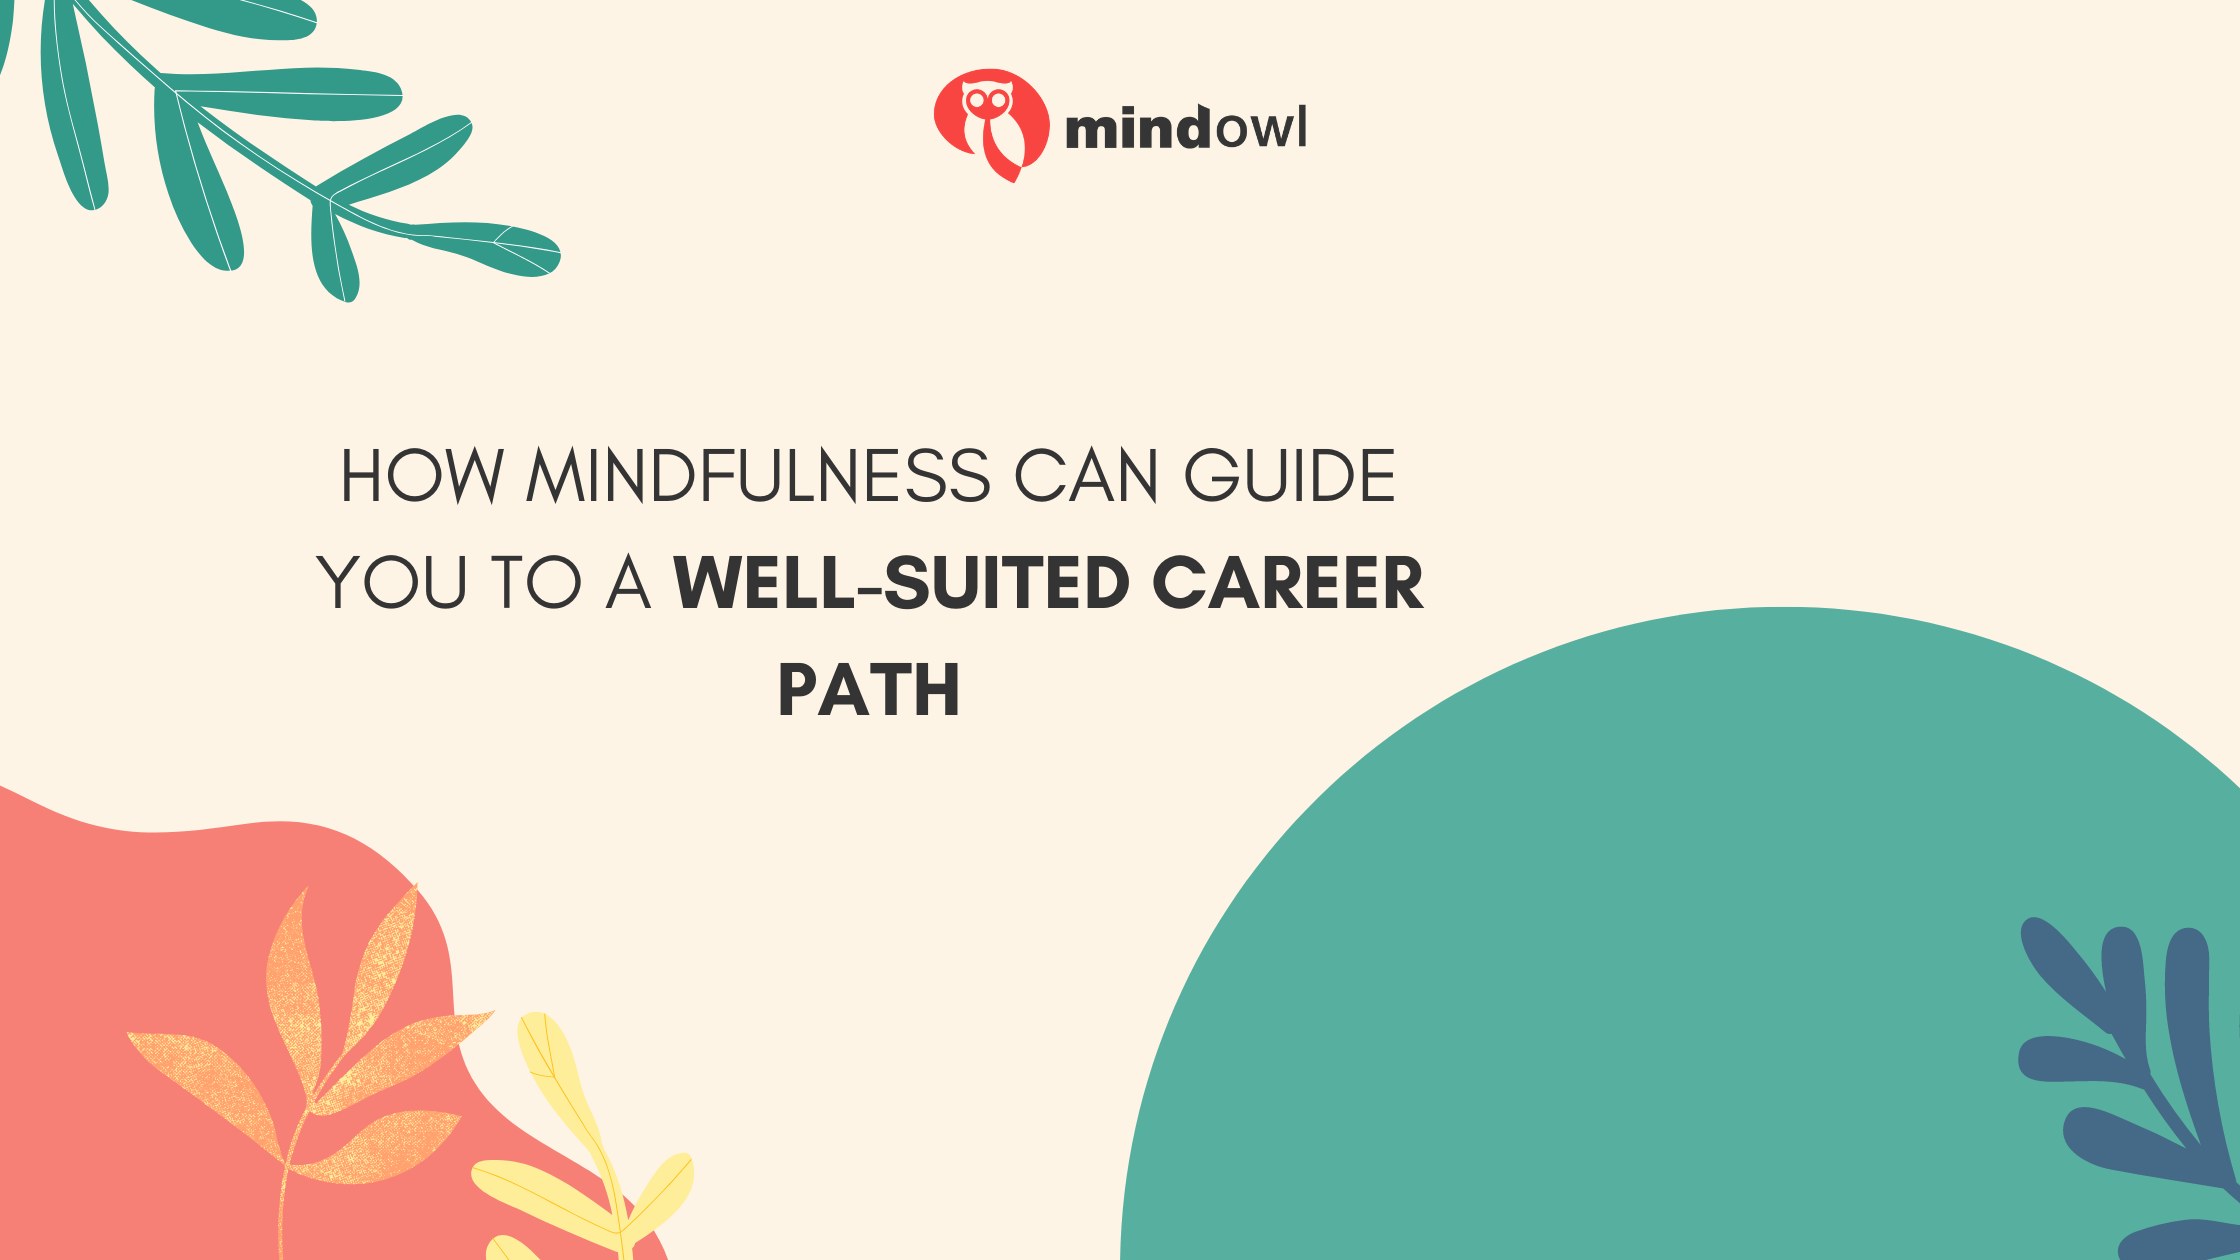 How Mindfulness Can Guide You to a Well-Suited Career Path